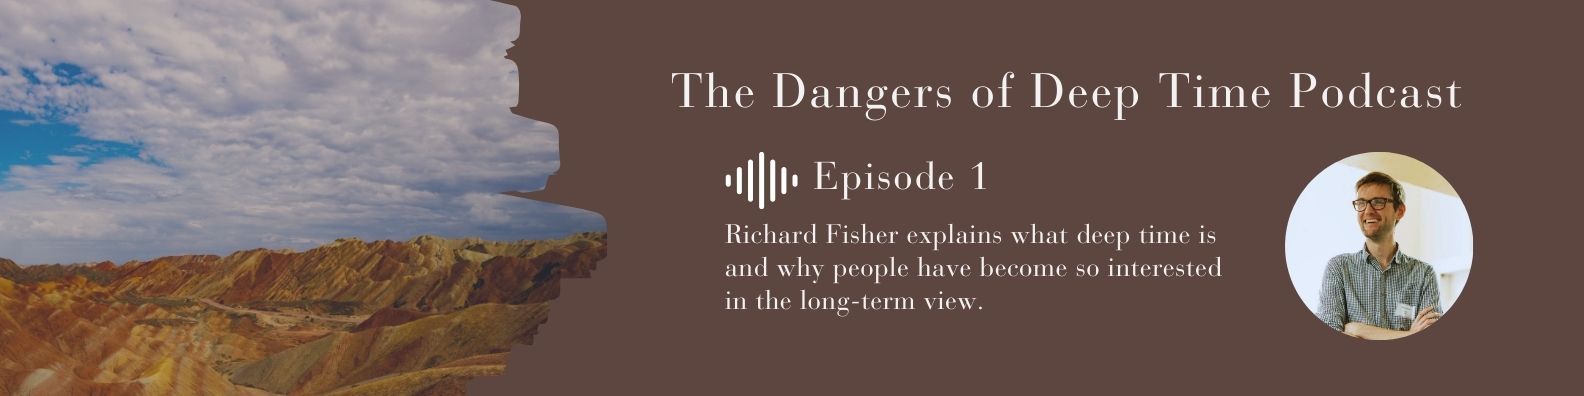 Dangers of Deep Time Podcast Episode 1 Fisher